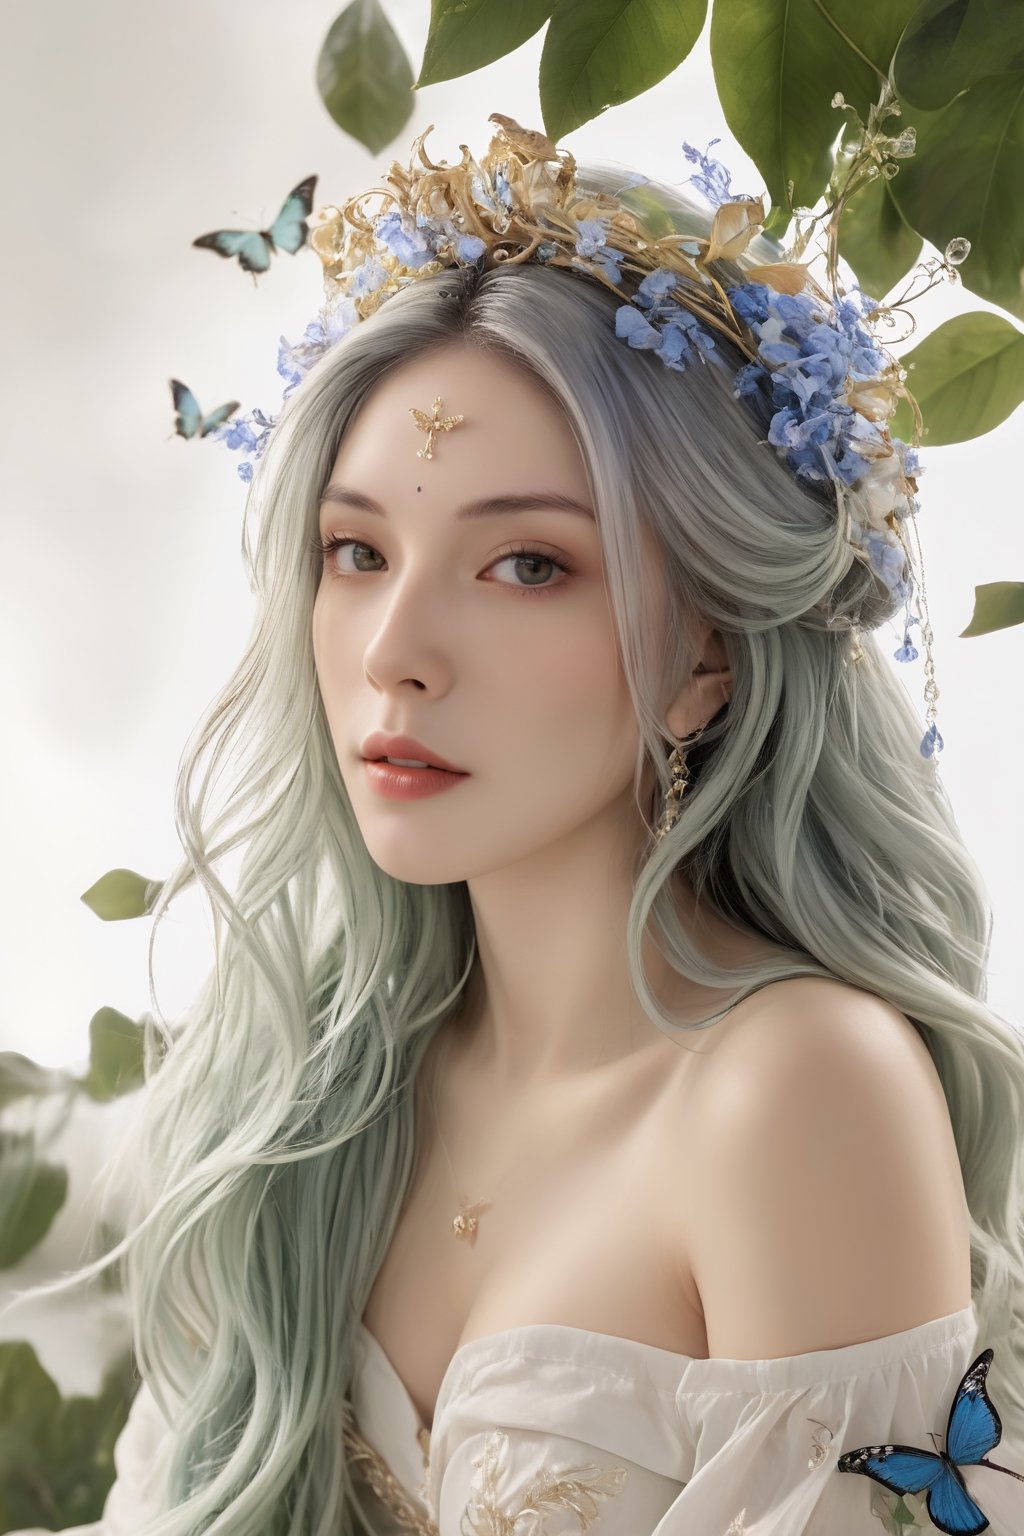 (ultra realistic,best quality),photorealistic,Extremely Realistic, in depth, cinematic light,hubggirl,
porcelain skin, baroque, long swirling green hair, lavish green leaves, falling blue flowers, celestial lighting, butterflies, tree branches, sky, golden glowing, water drops,

perfect lighting, vibrant colors, intricate details,
high detailed skin, pale skin,
intricate background, realism,realistic,raw,analog,portrait,photorealistic,
taken by Canon EOS,SIGMA Art Lens 35mm F1.4,ISO 200 Shutter Speed 2000,Vivid picture